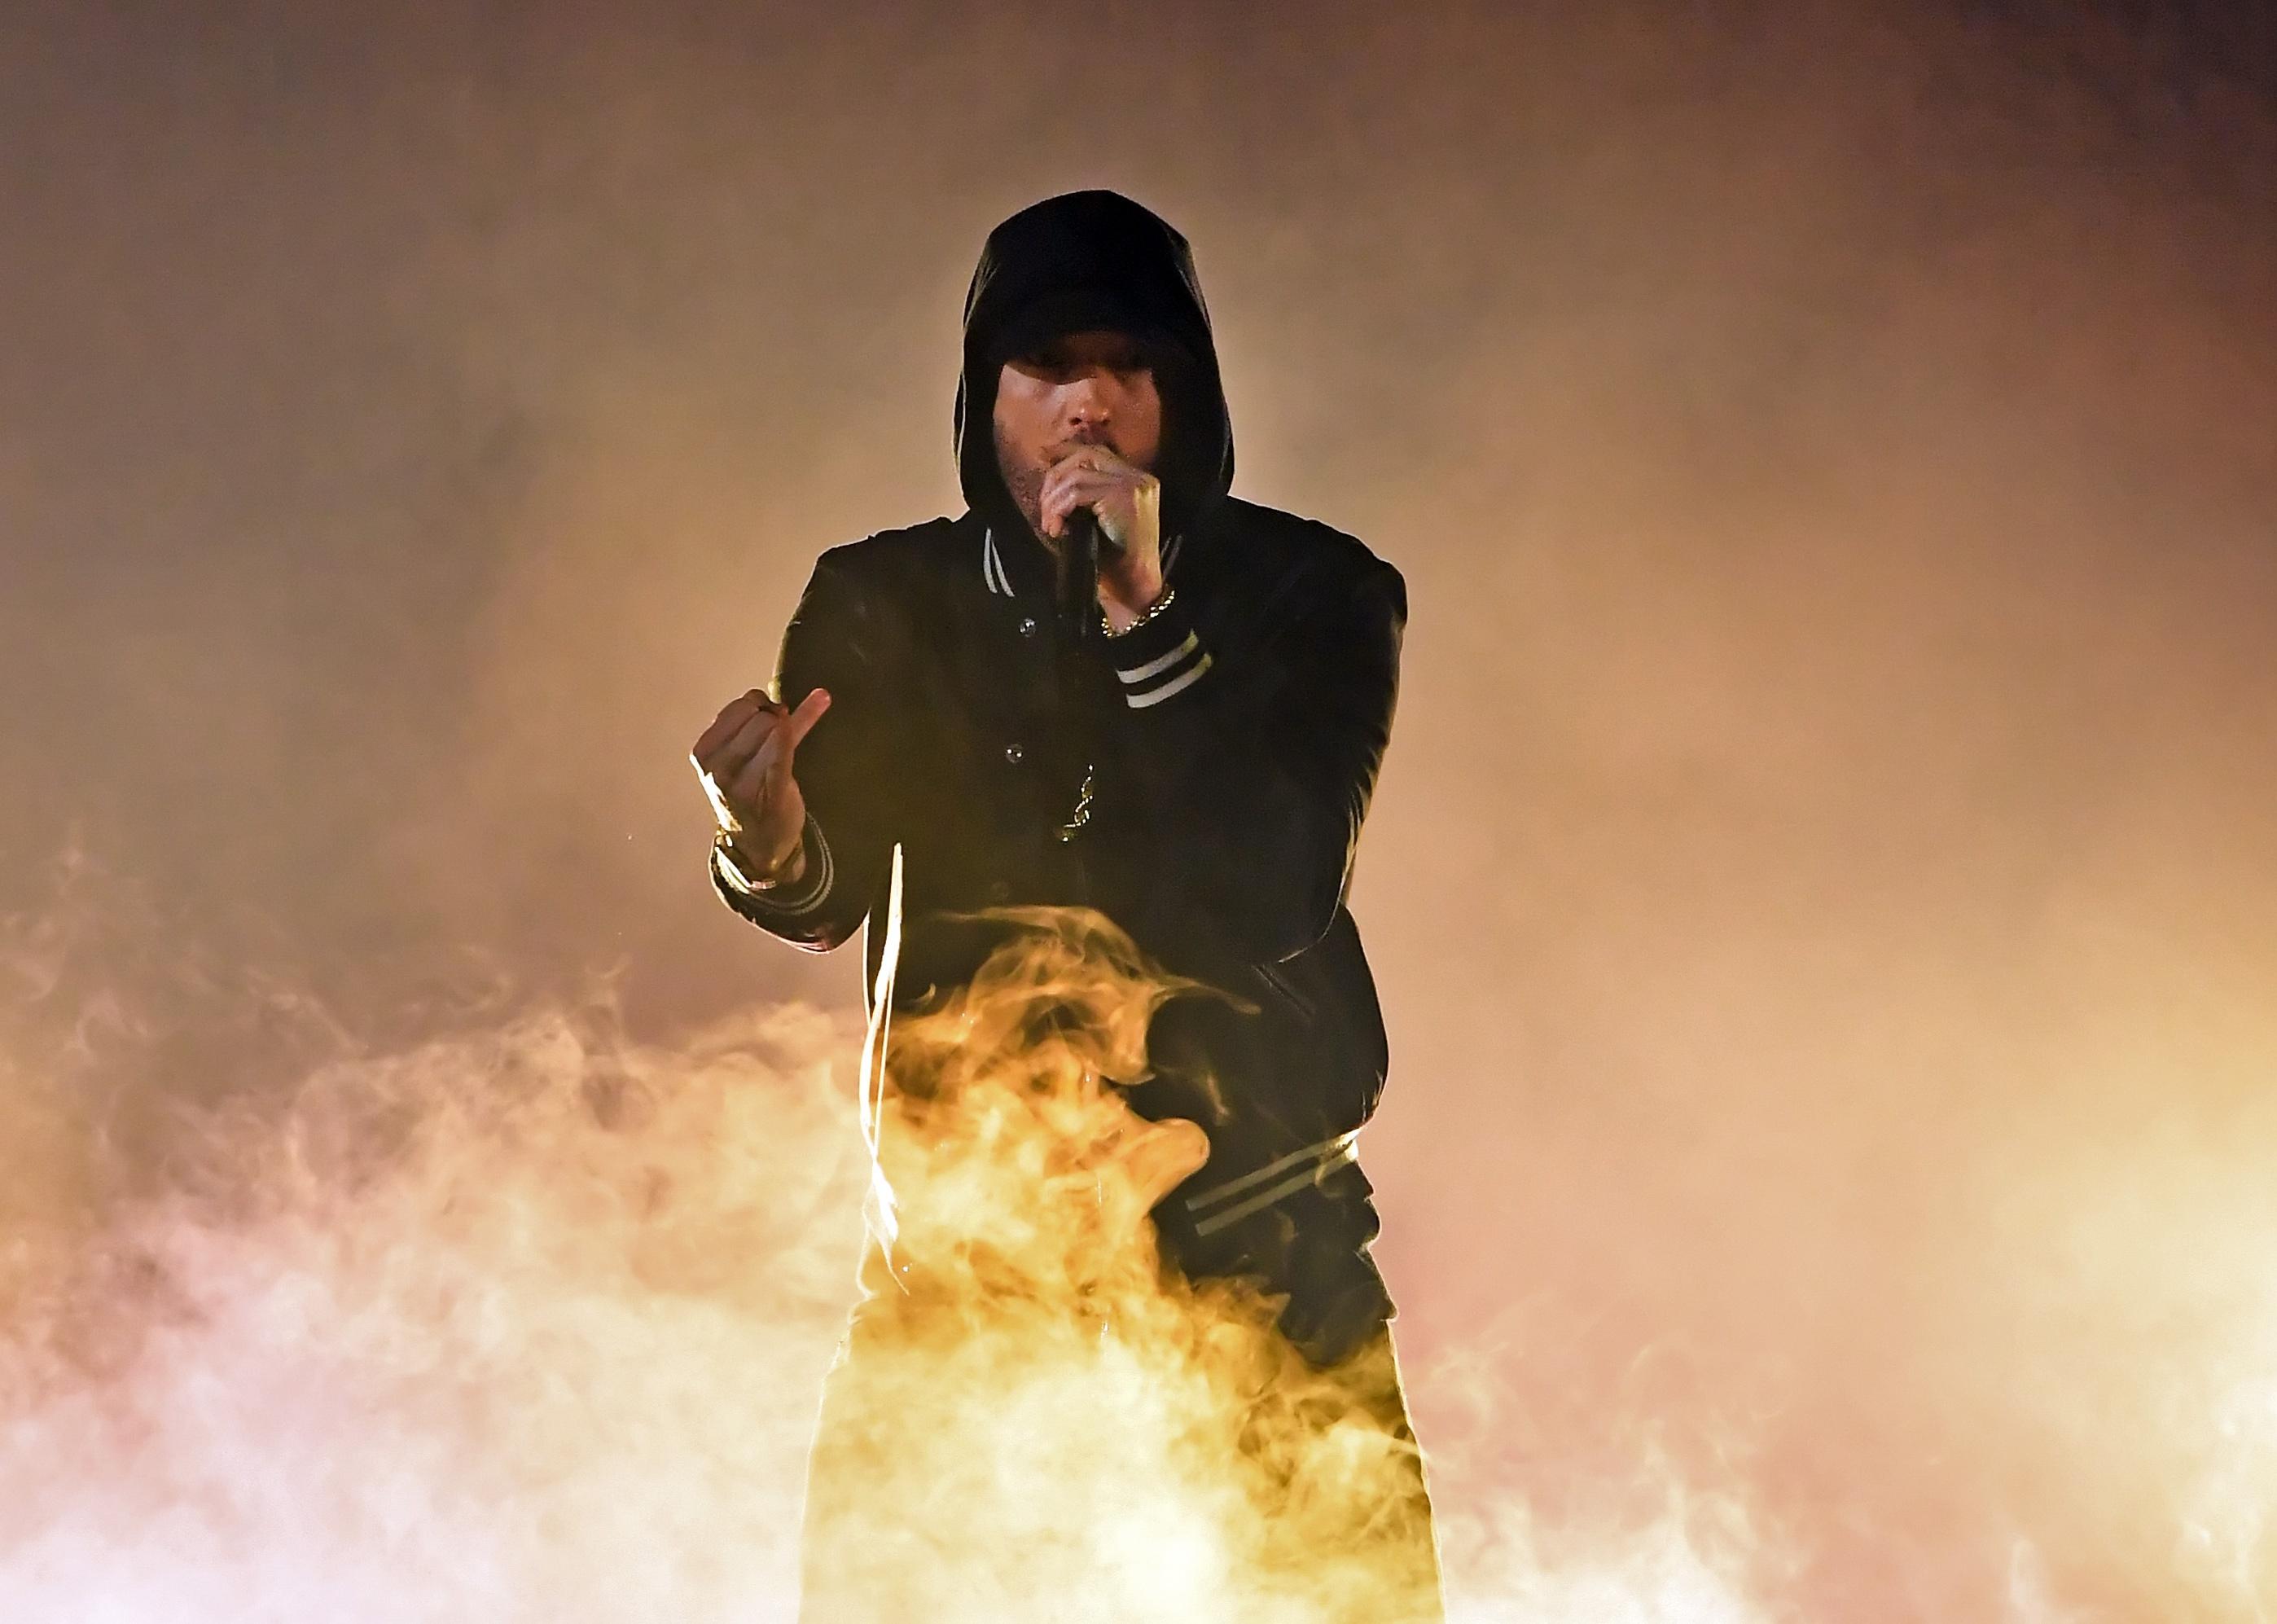 Eminem performing in all black with yellow smoke in front